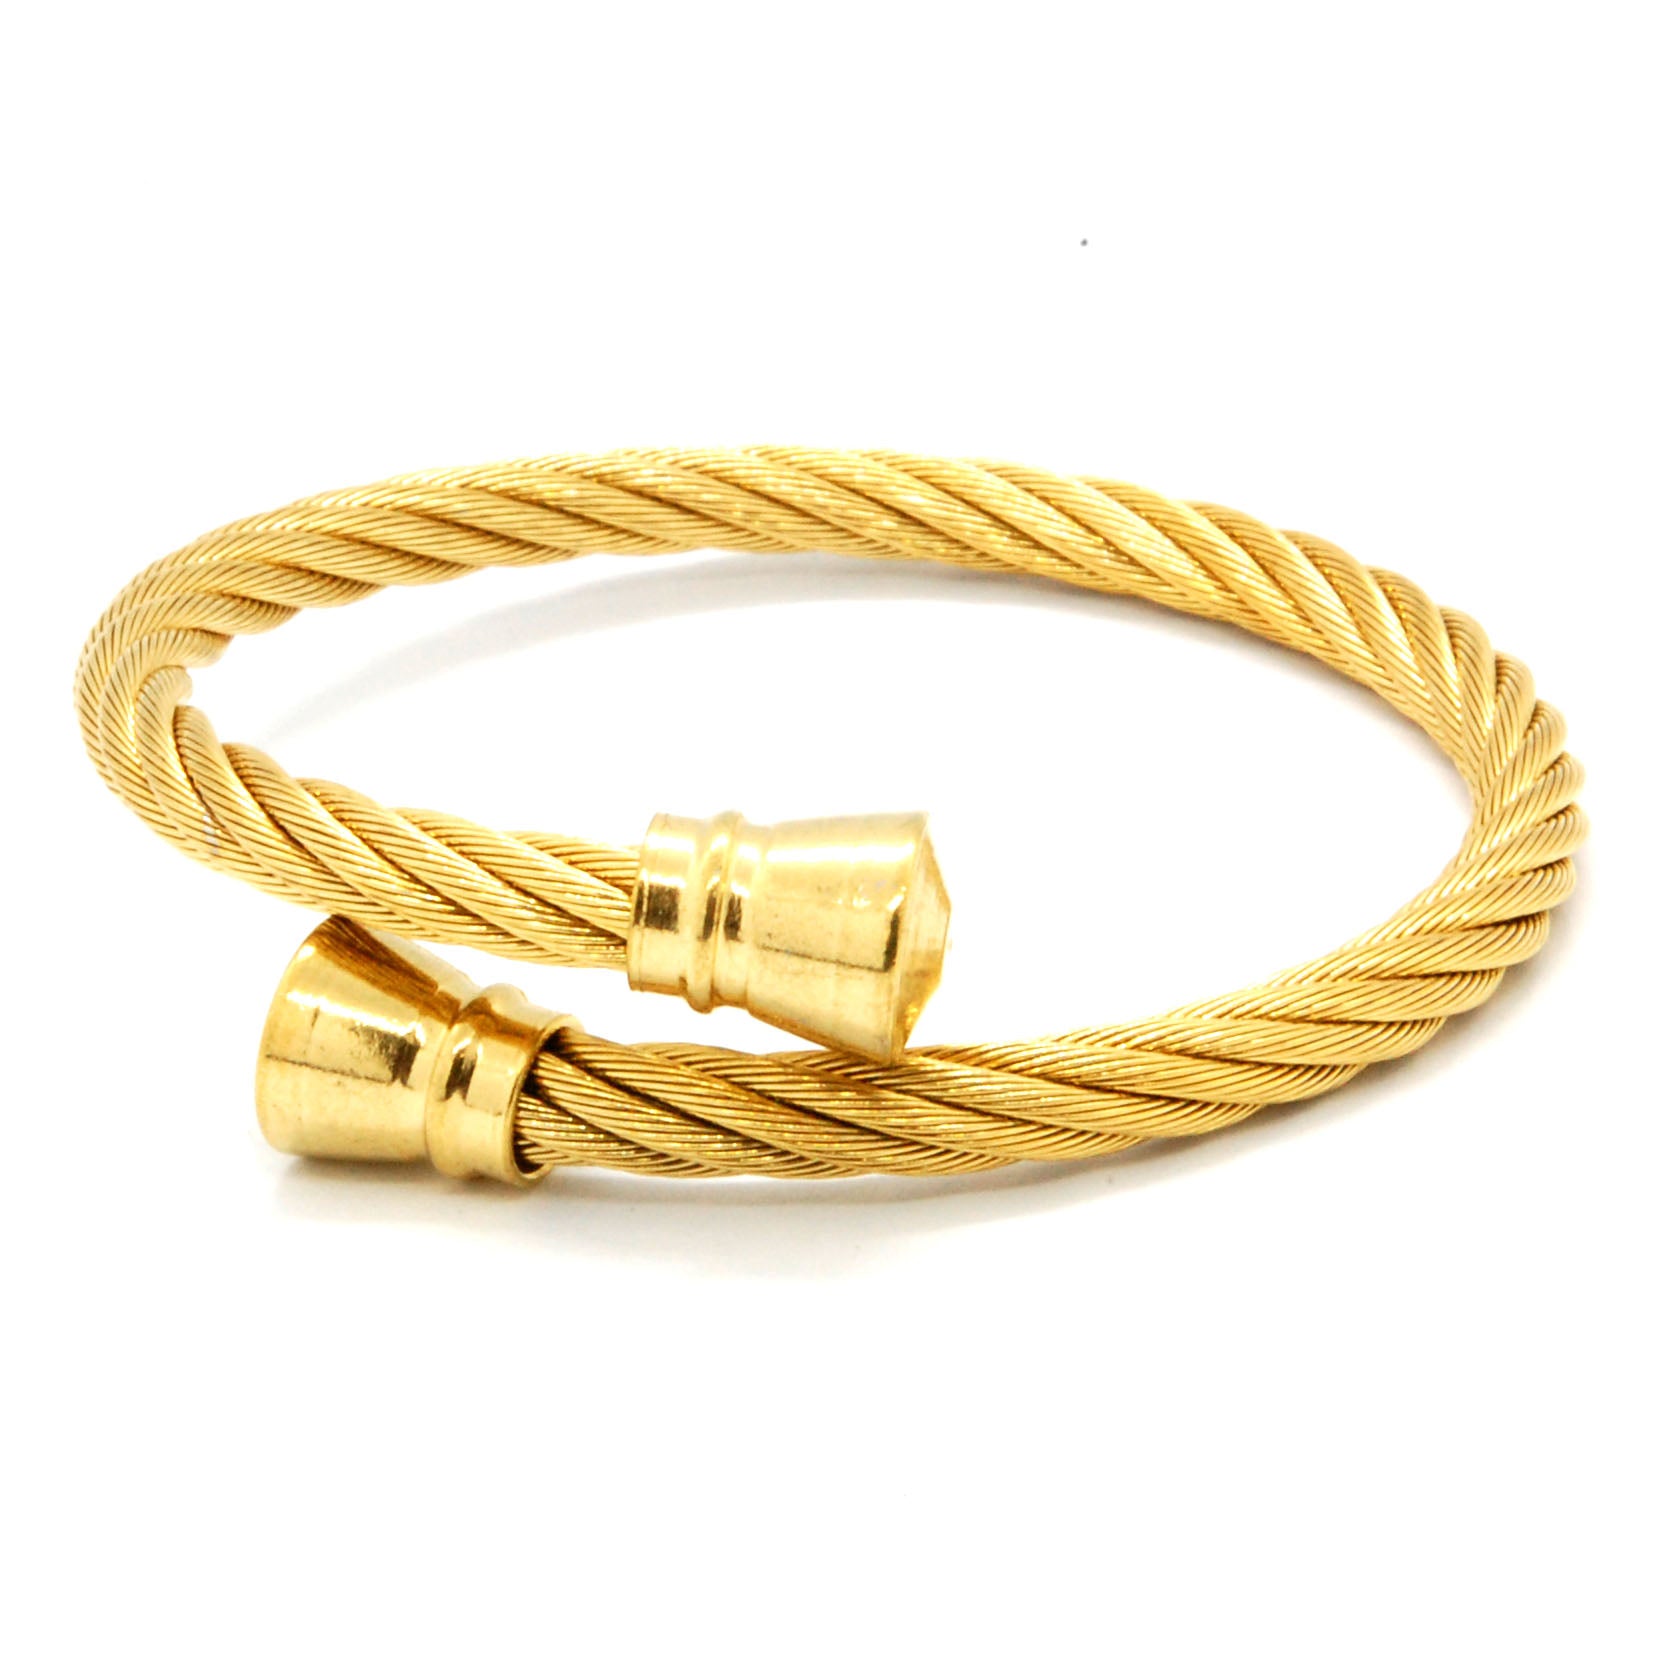 ESBG 7852: Gold-Plated Charriol Bangle w/ Gold-Plated Barrel Ends